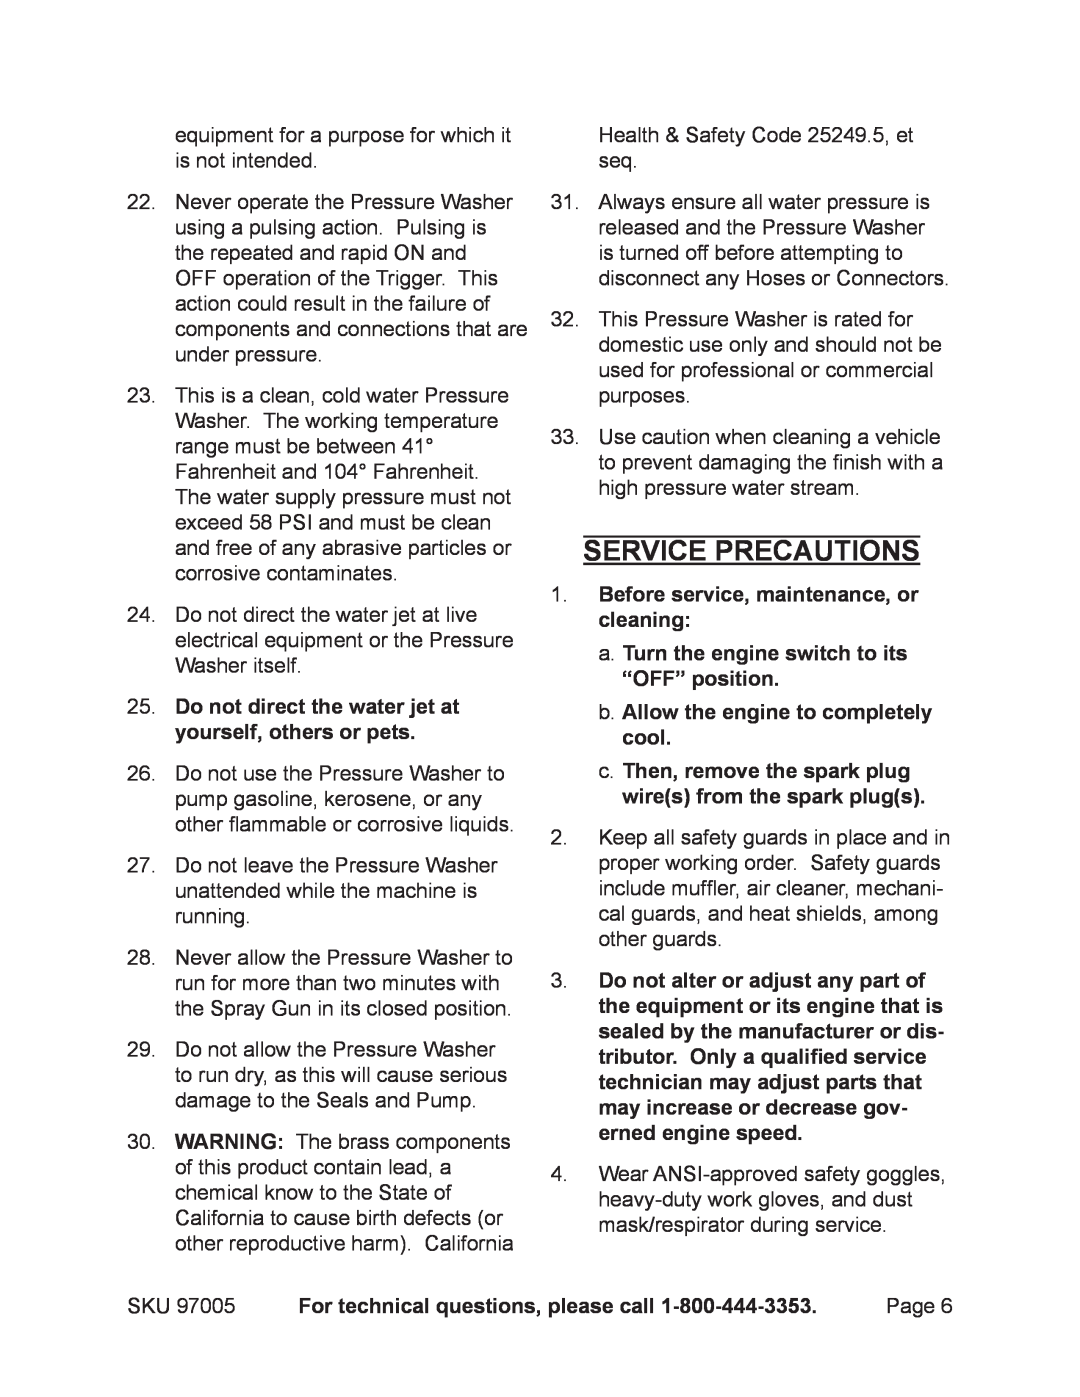 Harbor Freight Tools 97005 manual Service precautions, Do not direct the water jet at yourself, others or pets 